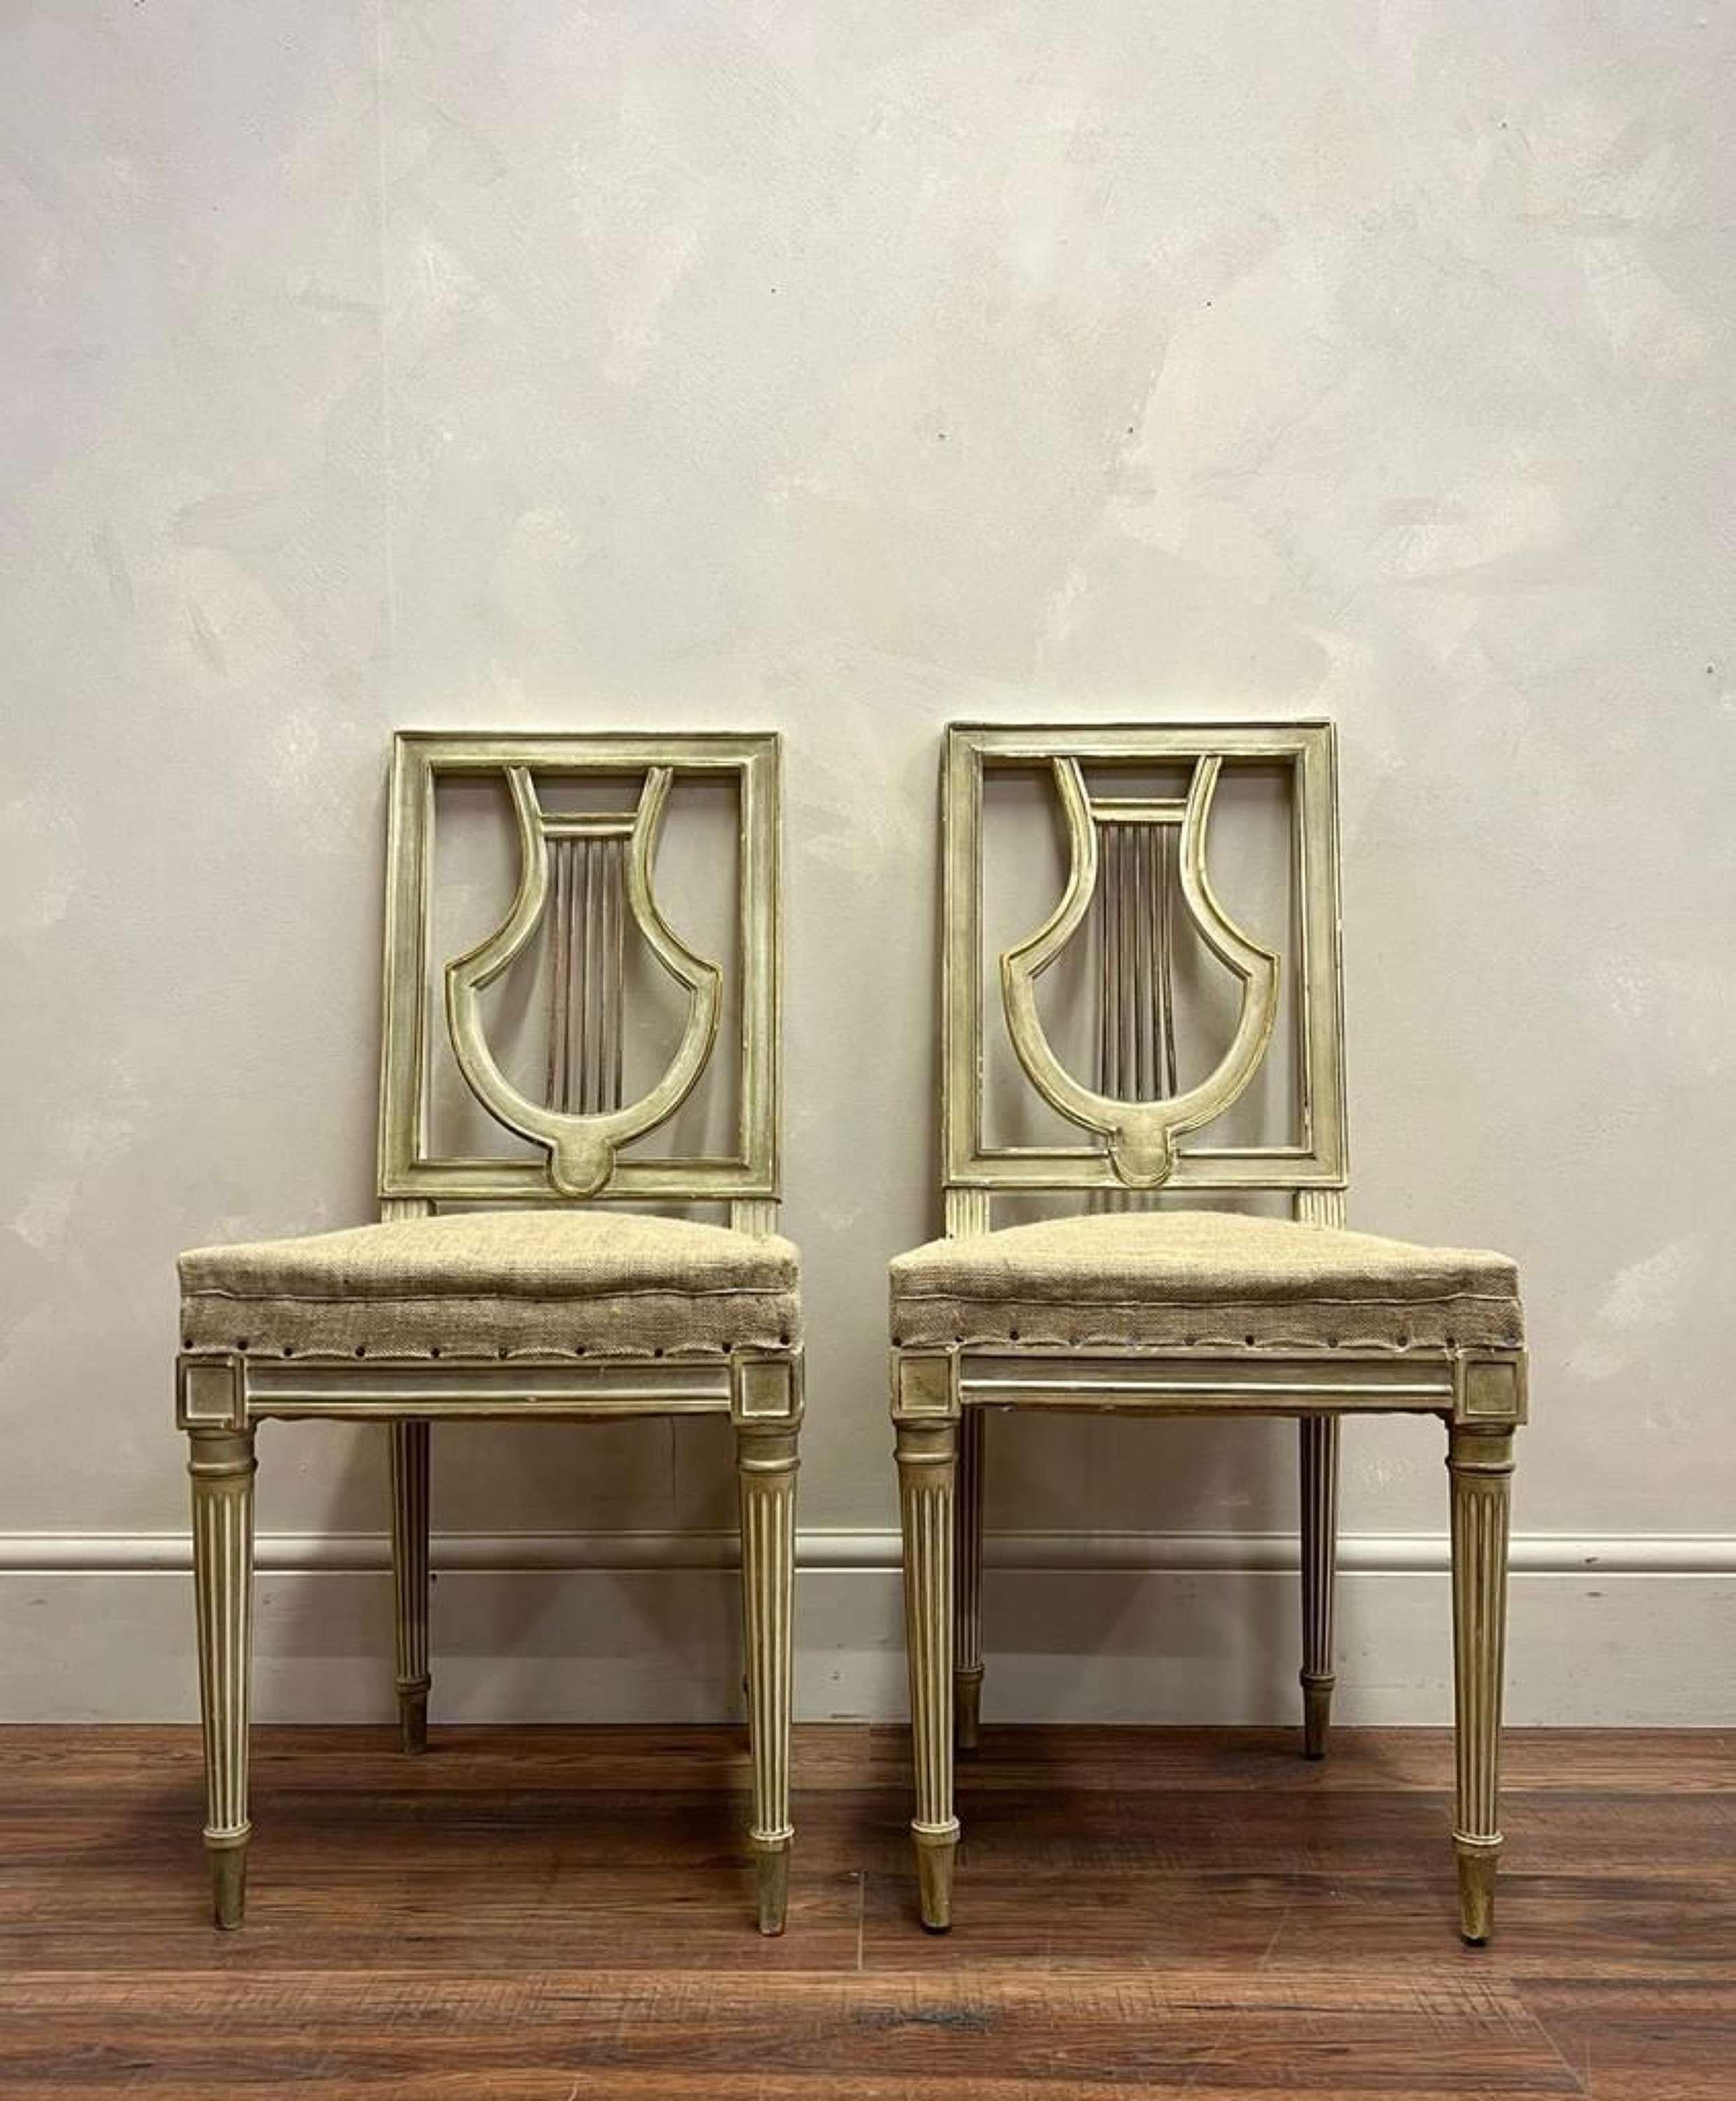 Lovely Pair of French Lyre back chairs.
New hessian traditional upholstery with webbing.
Worn in minimal places, but very good condition and solid.
Back Height - 88.5 cm / 34.8